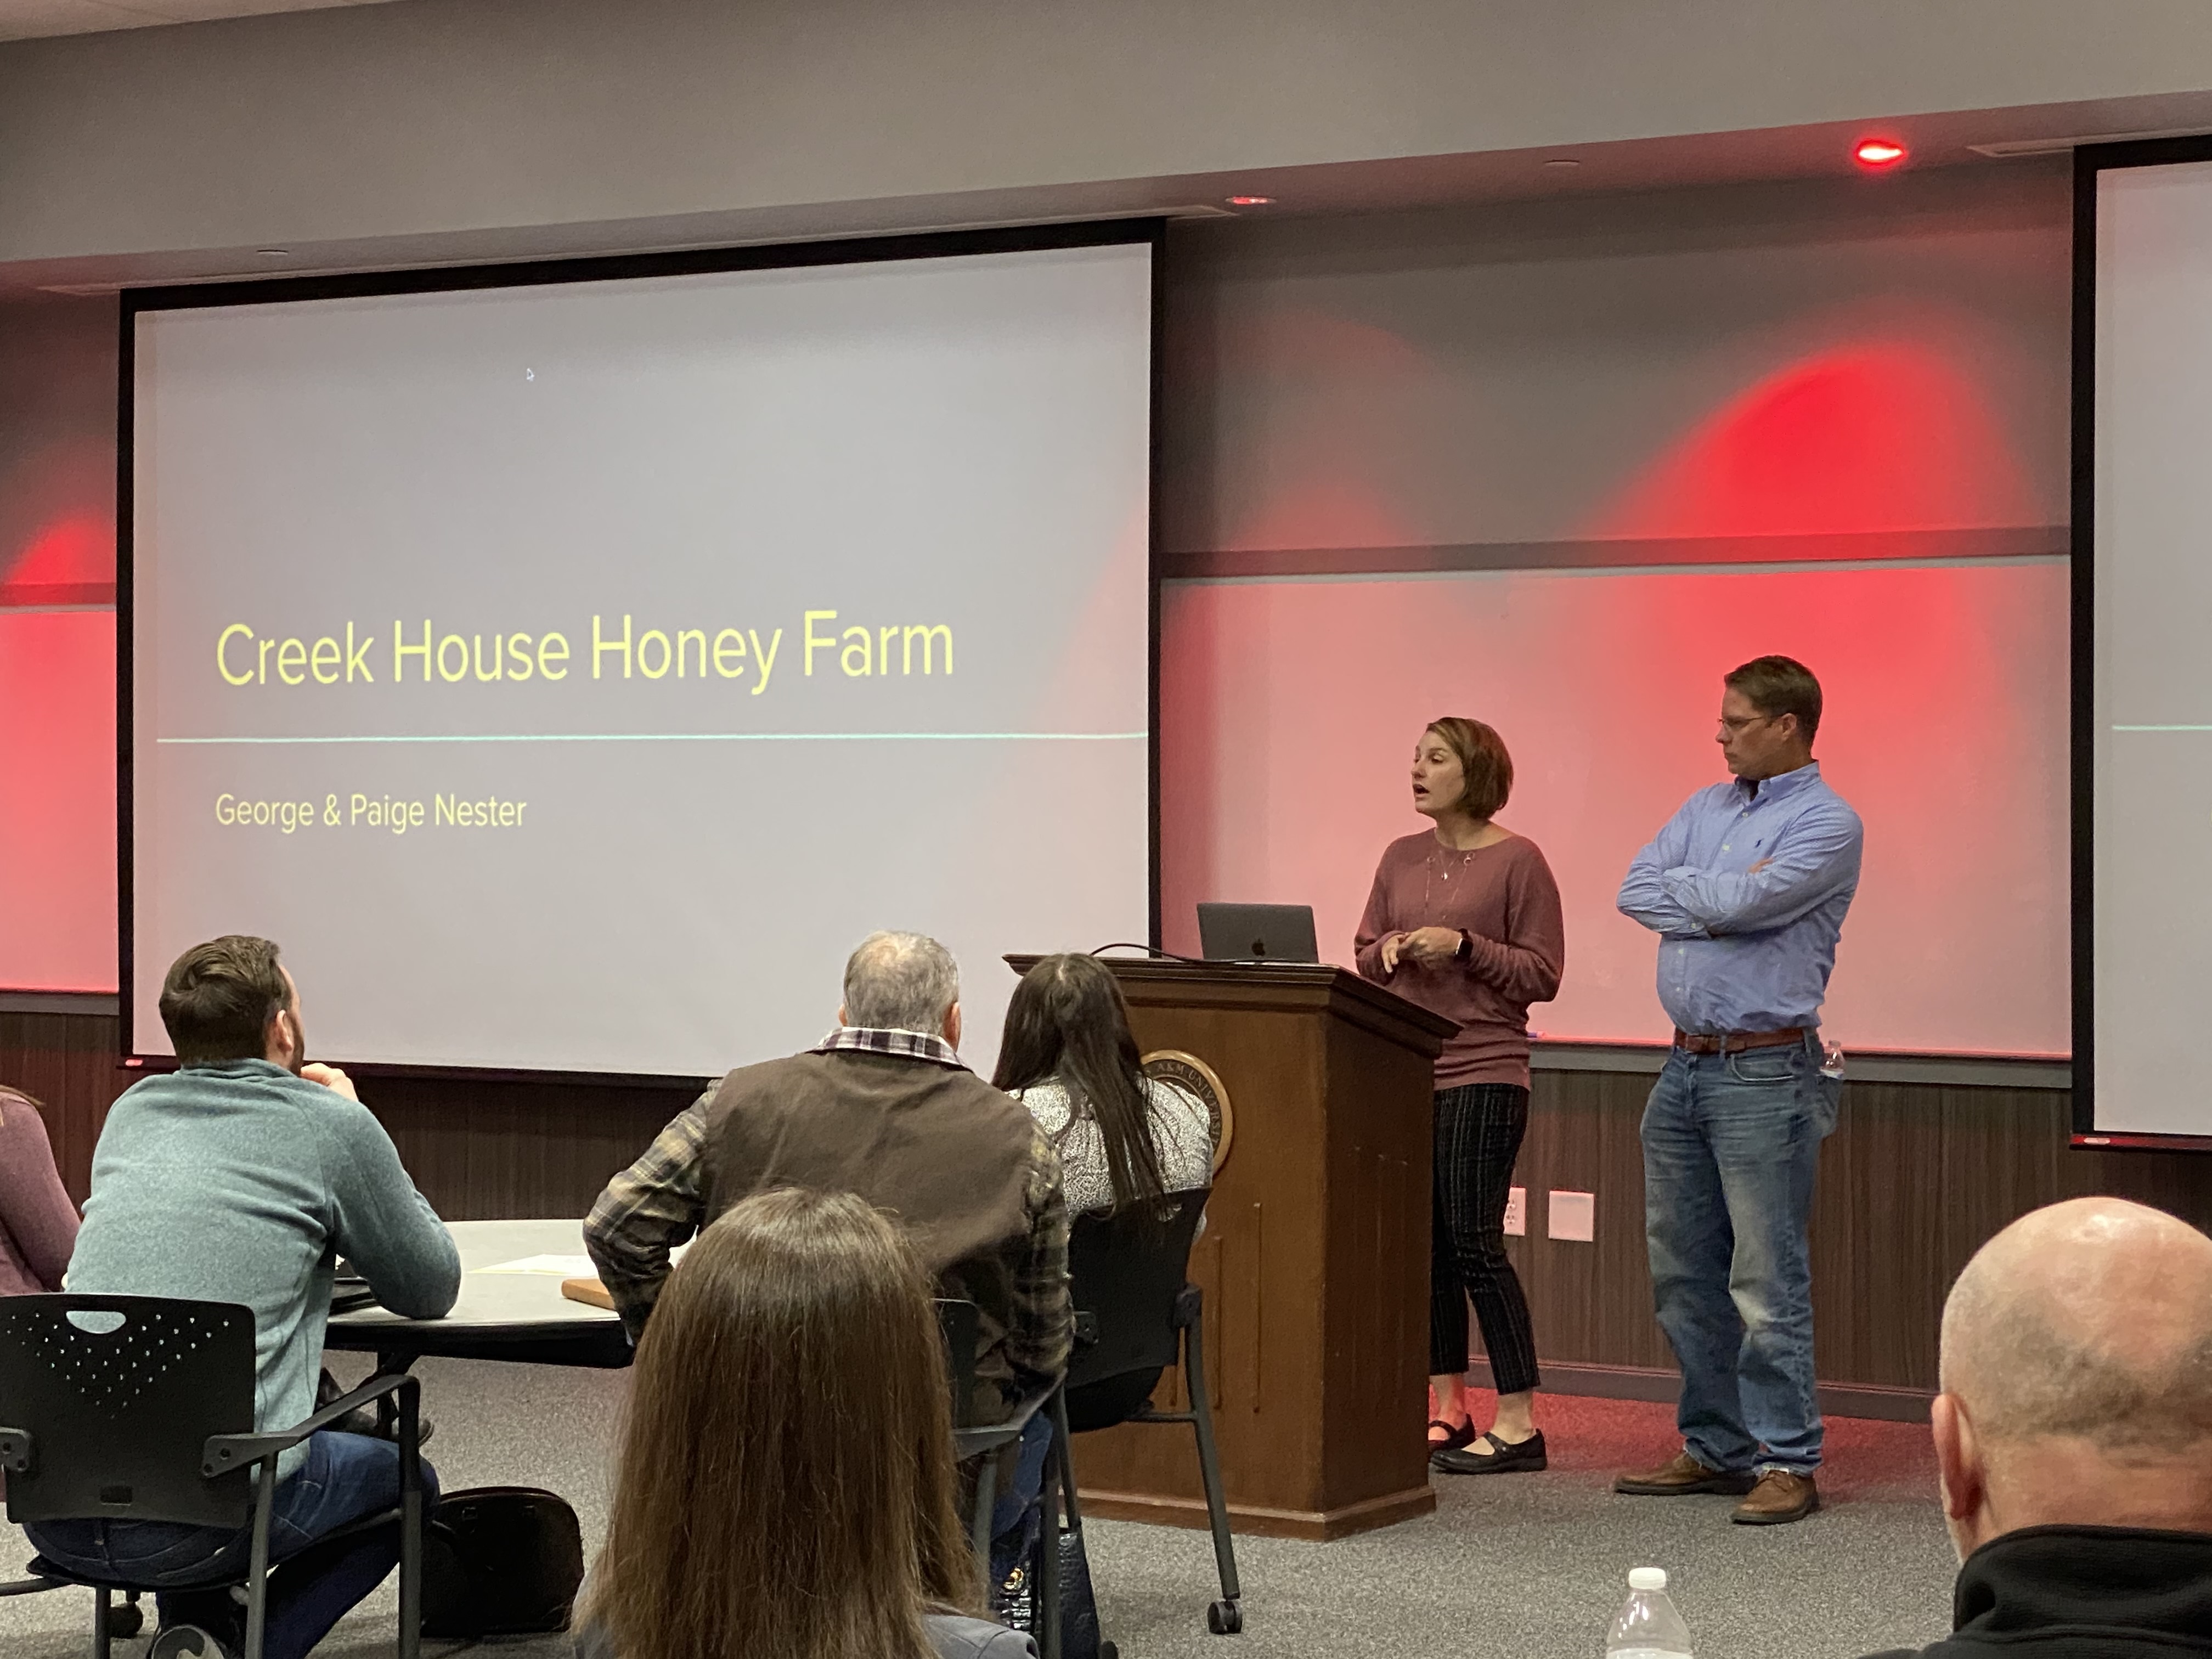 Owners of Creek House Honey Farm, Paige and George Nester